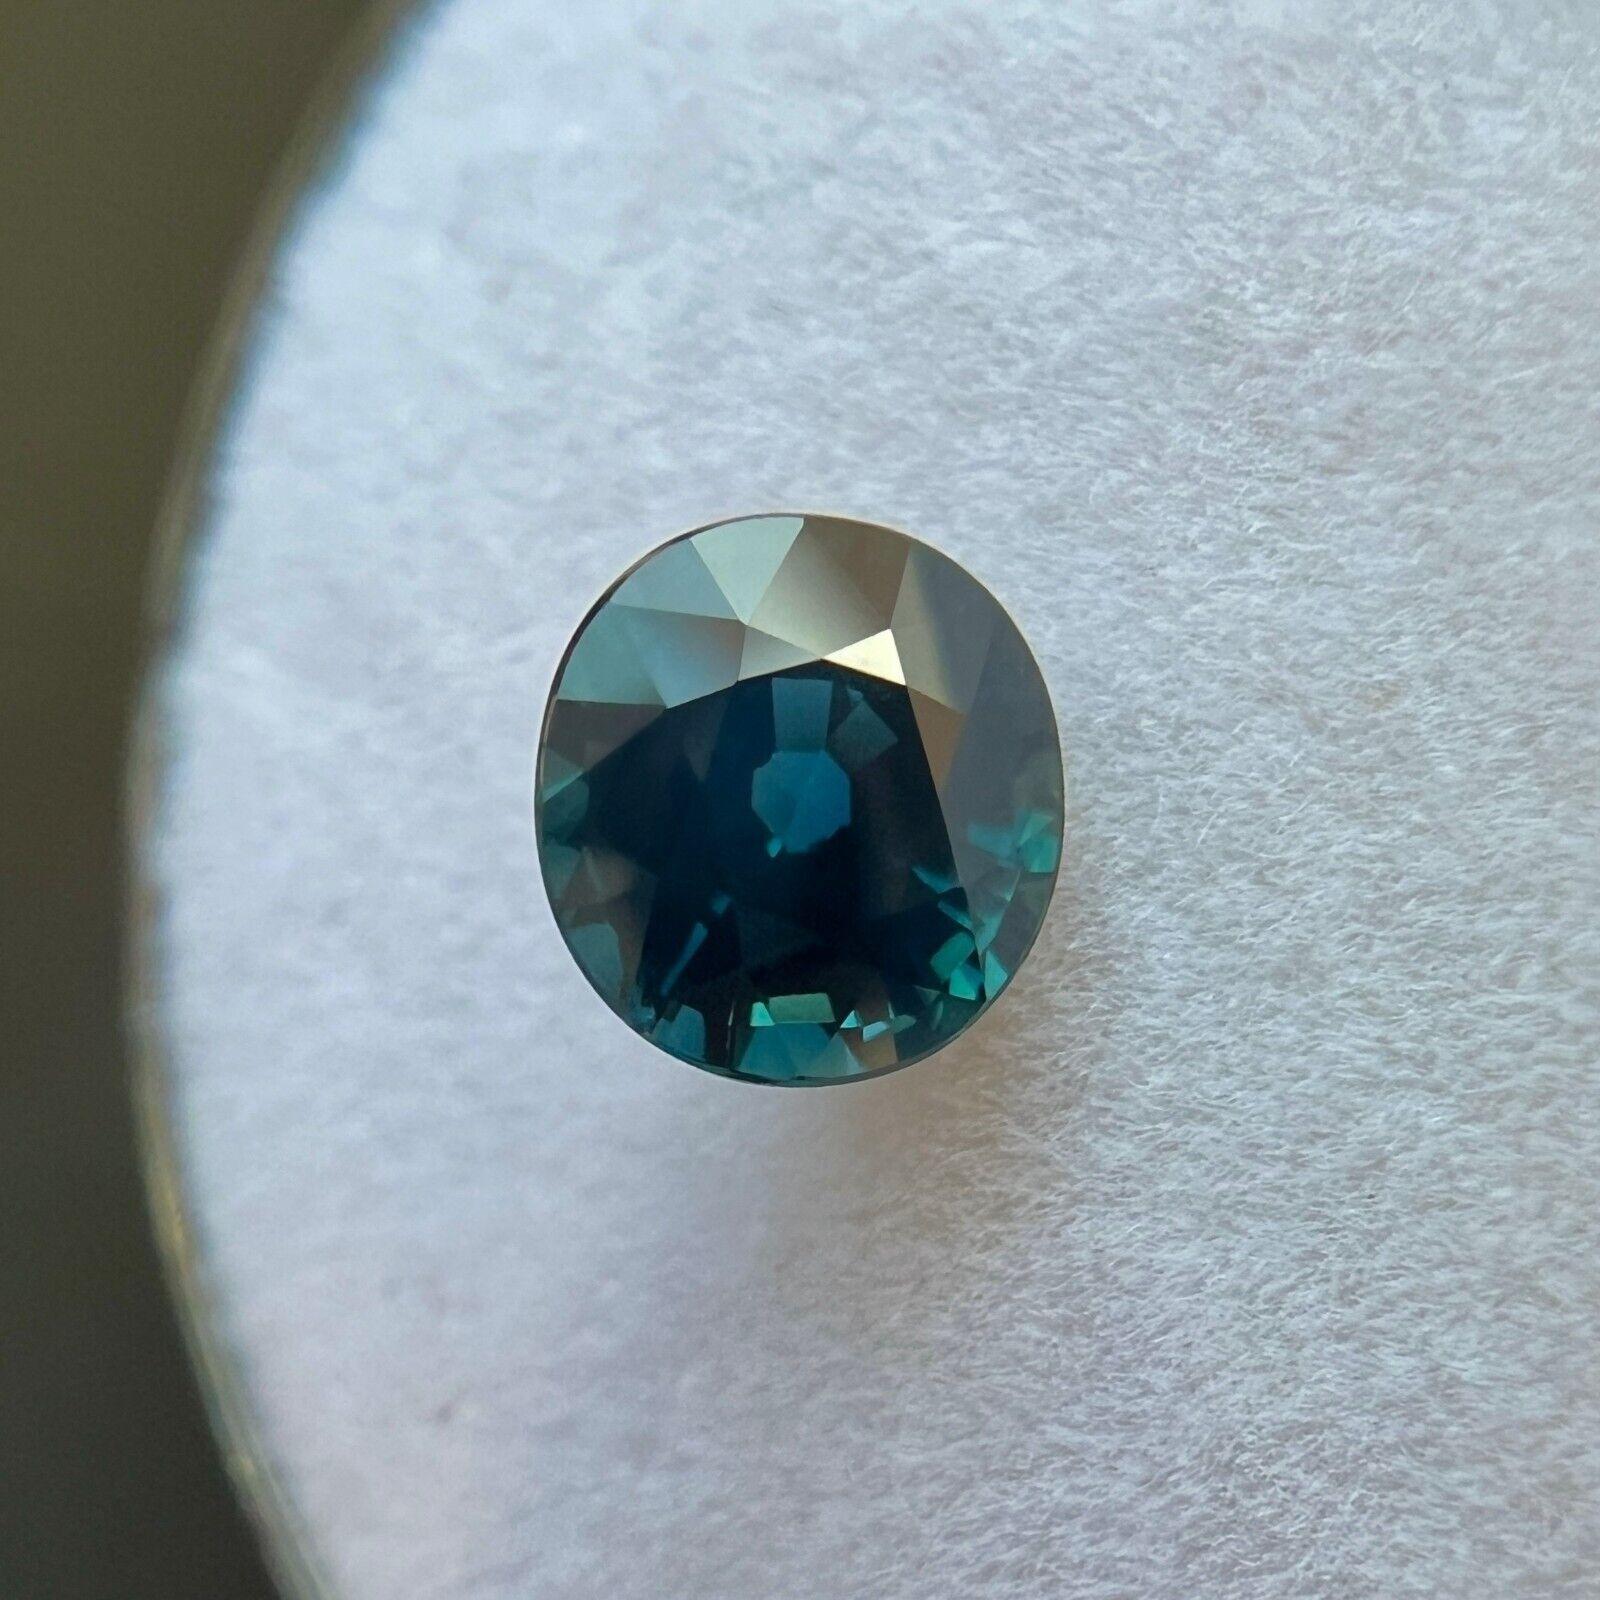 Round Cut IGI Certified 1.11Ct Natural Teal Blue Sapphire Untreated Unheated Rare Gem For Sale